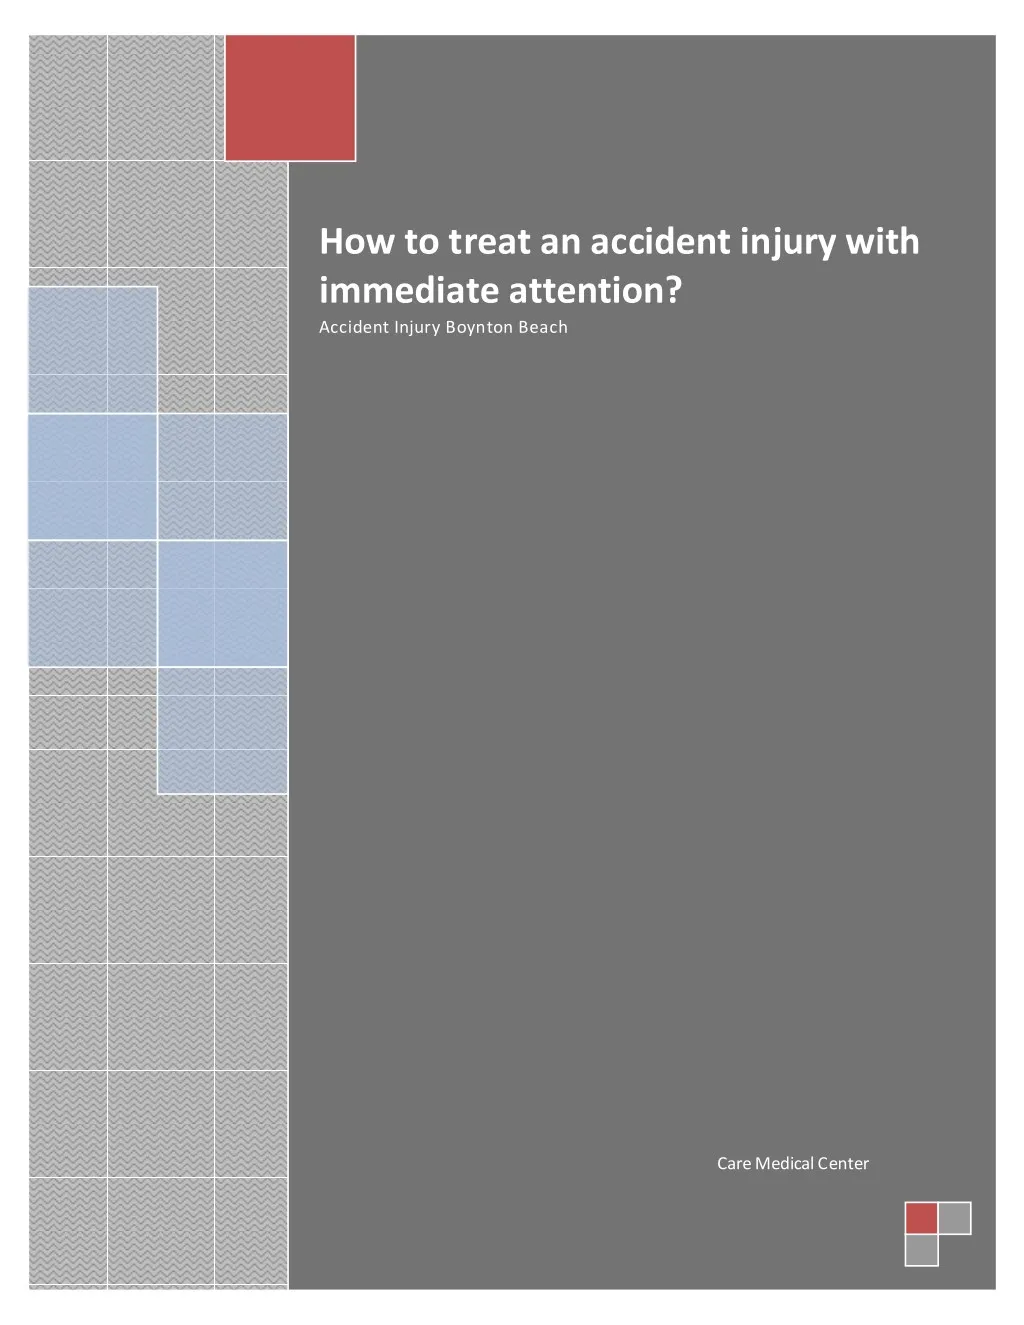 how to treat an accident injury with immediate